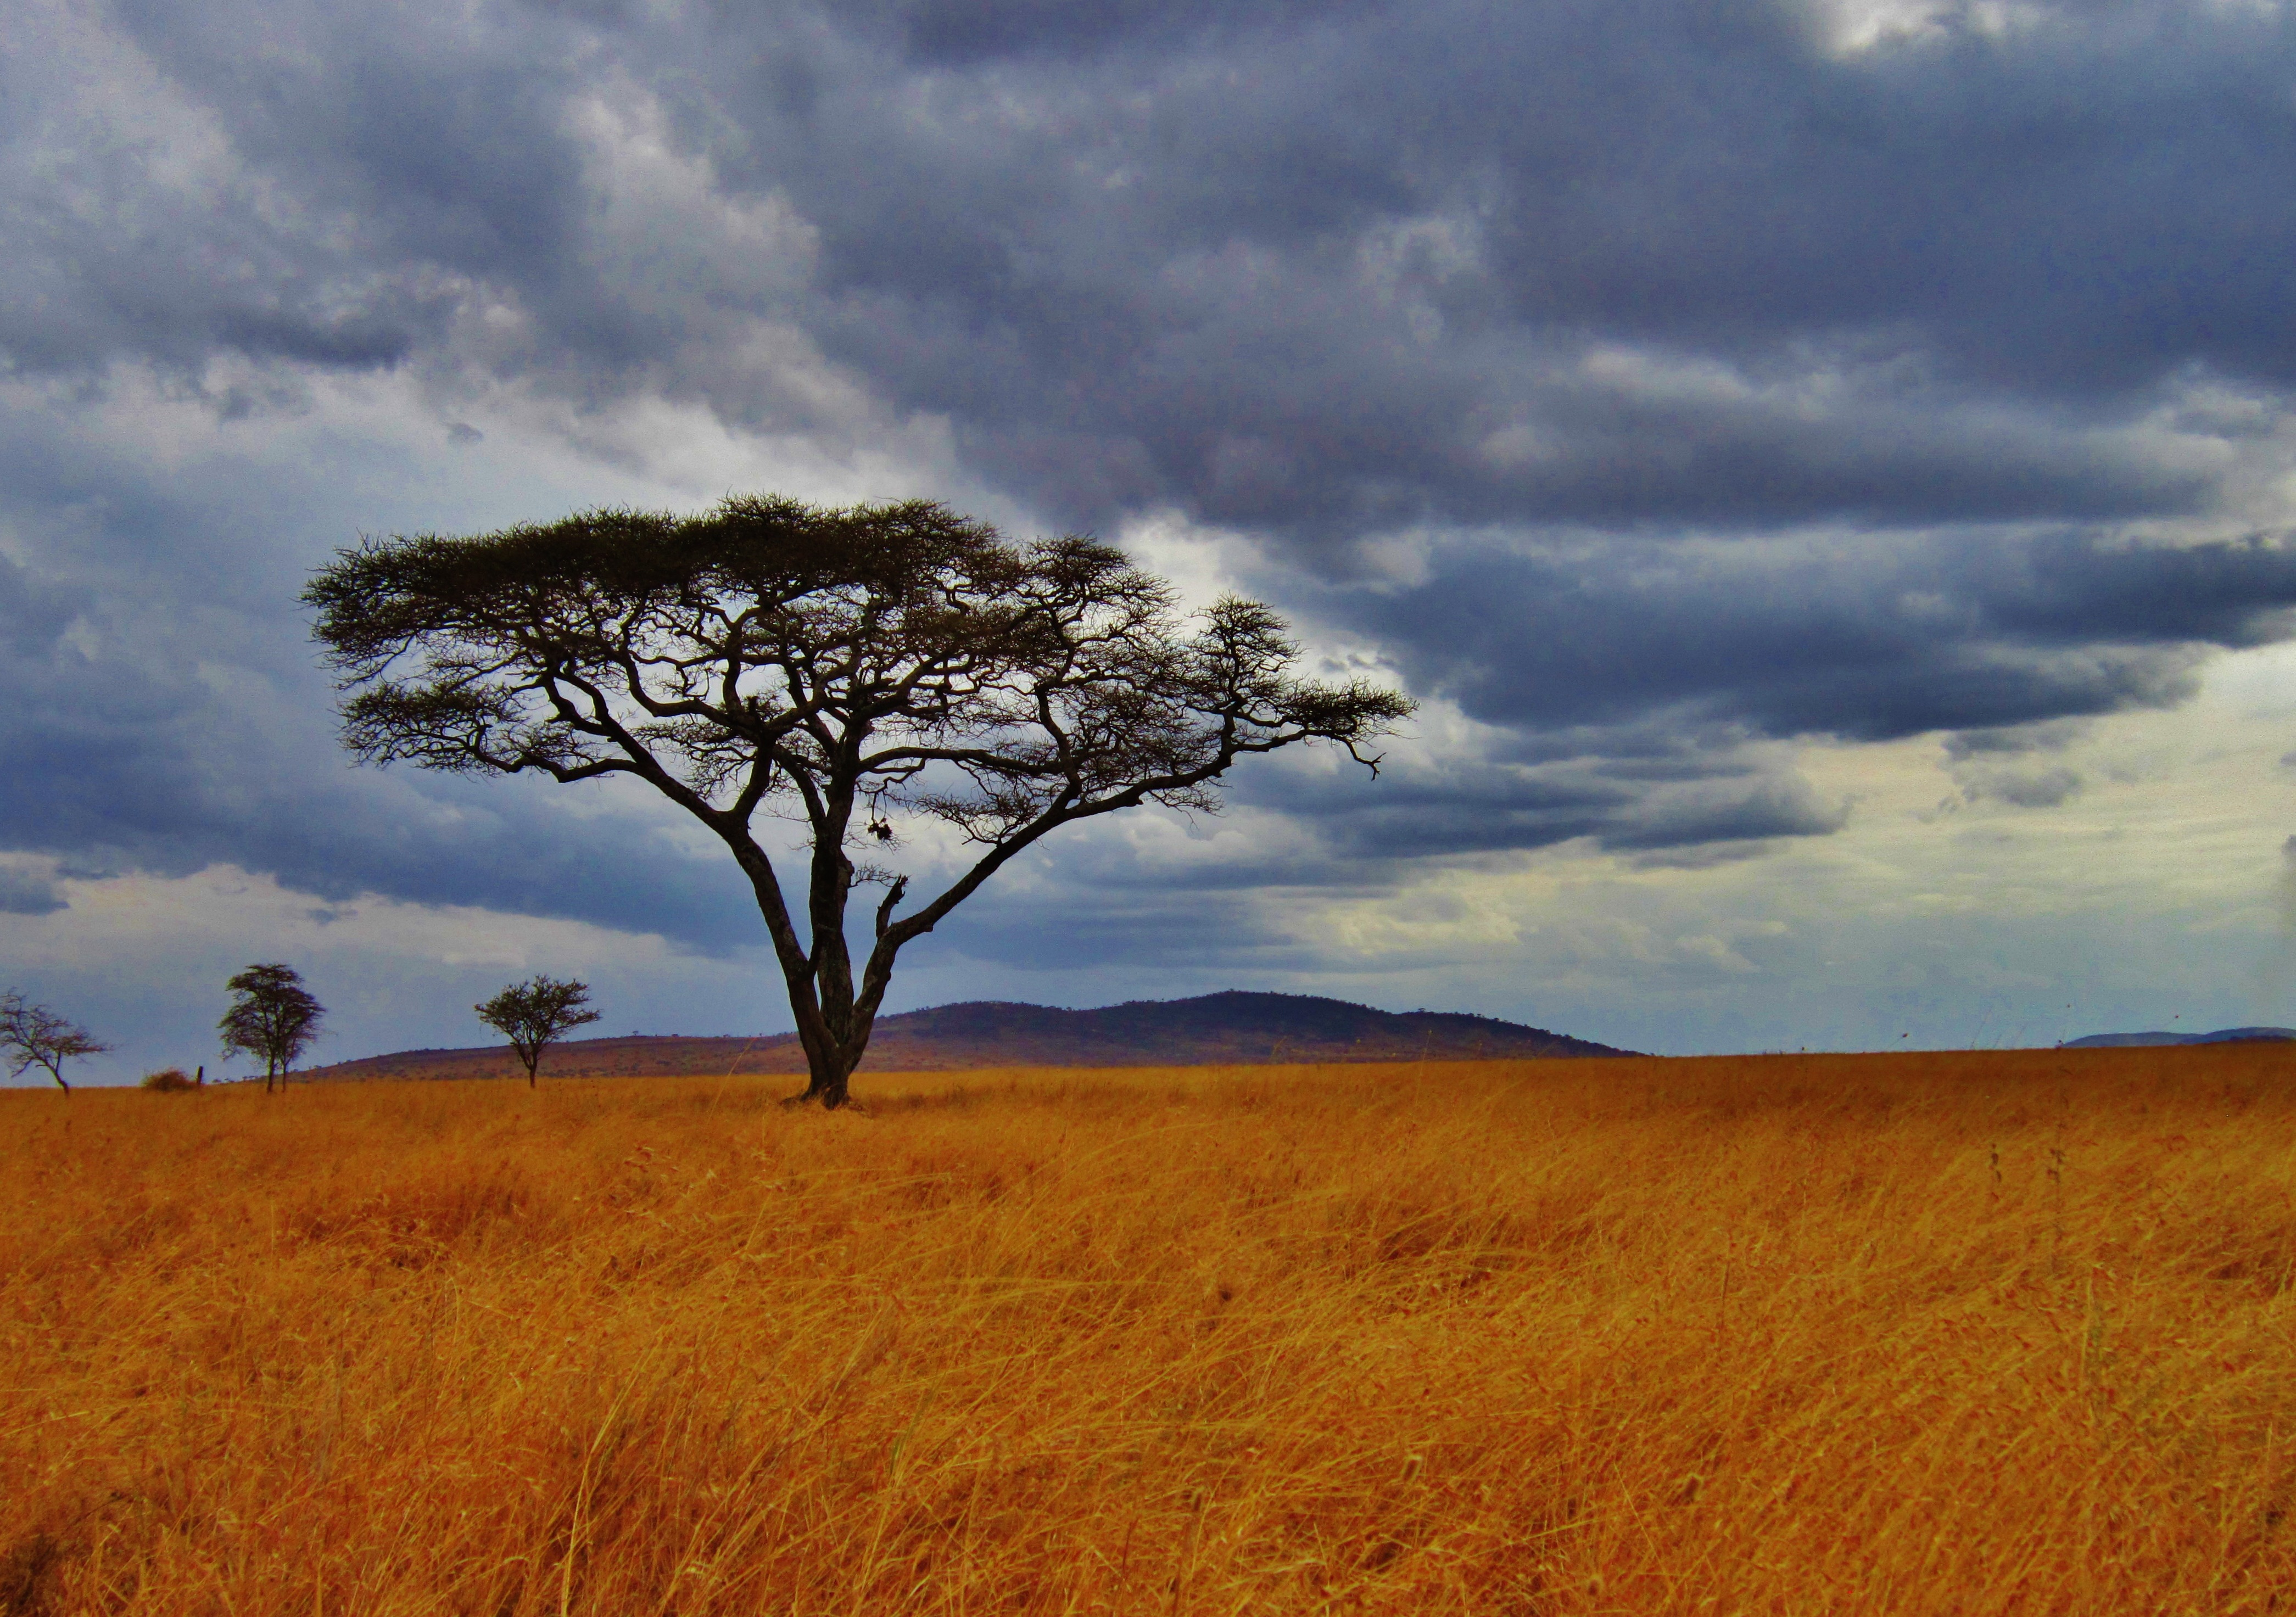 Tall tree in Tanzania with mountains in background and stormy sky